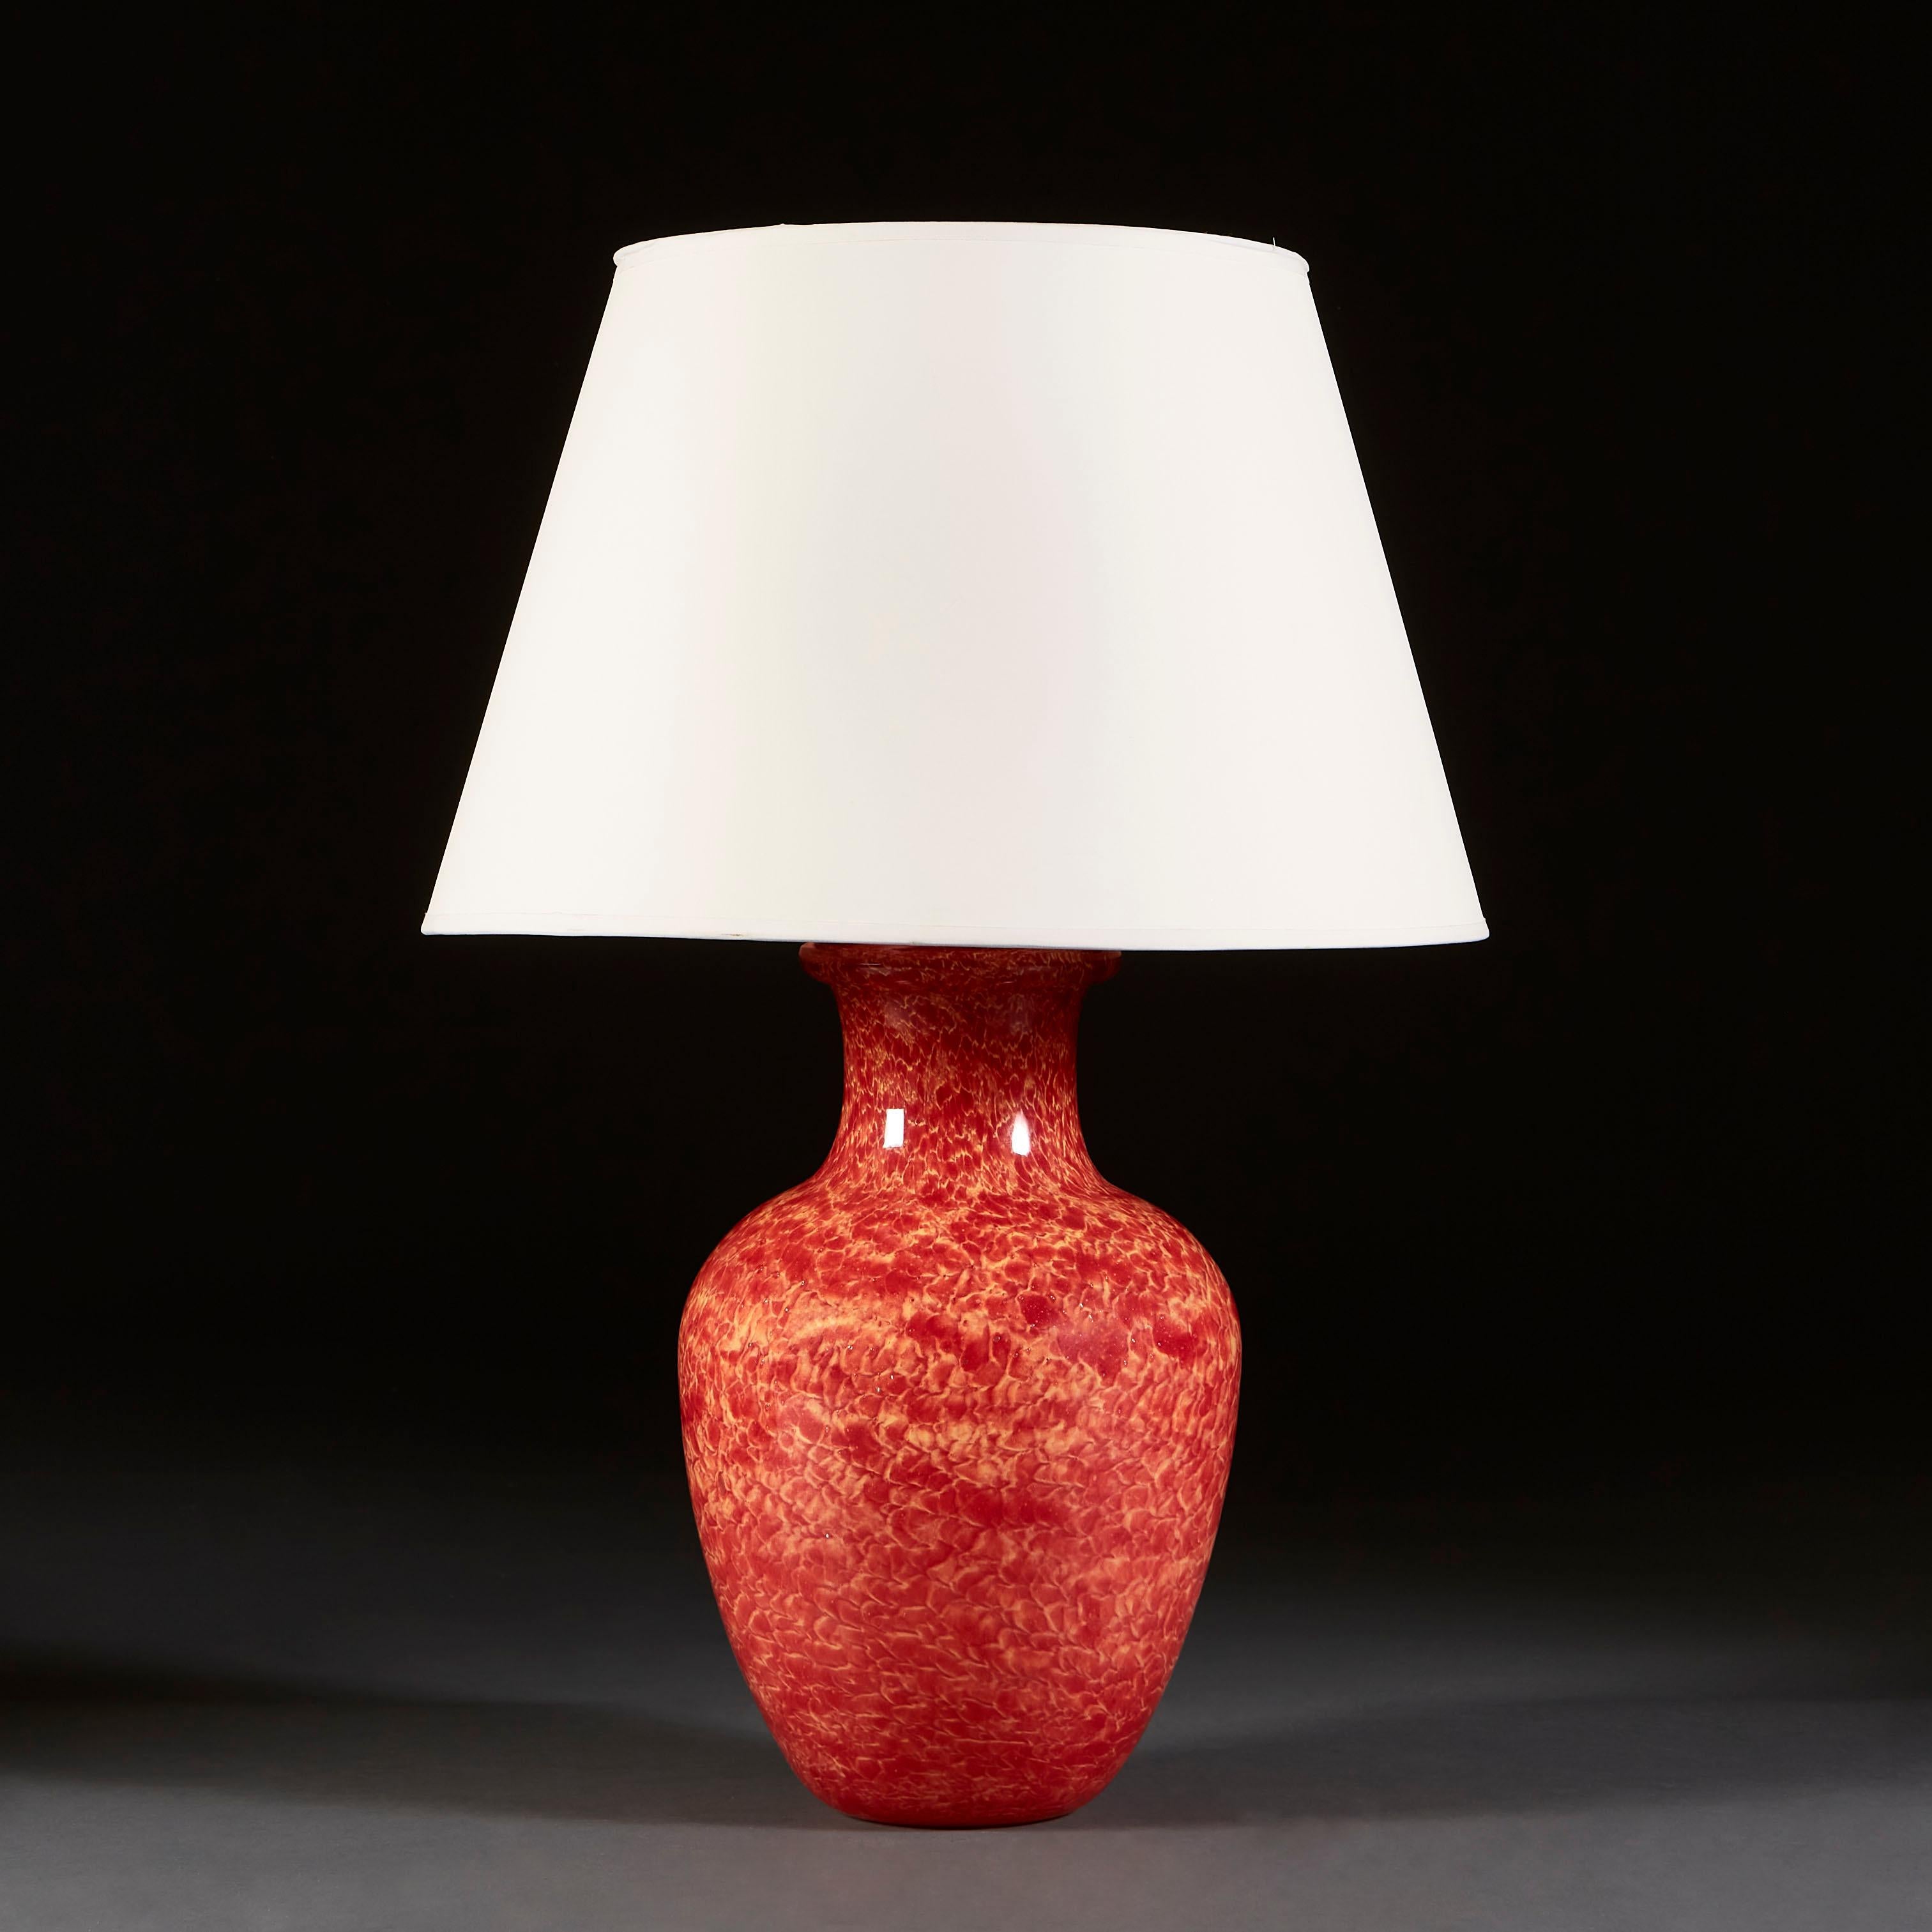 A mid-century French art glass vase as a lamp, with a fiery red glaze reminiscent of flowing lava that is broken into scale-like forms by areas of creamy orange.

Currently wired for the UK.

Please note: lampshade not included.